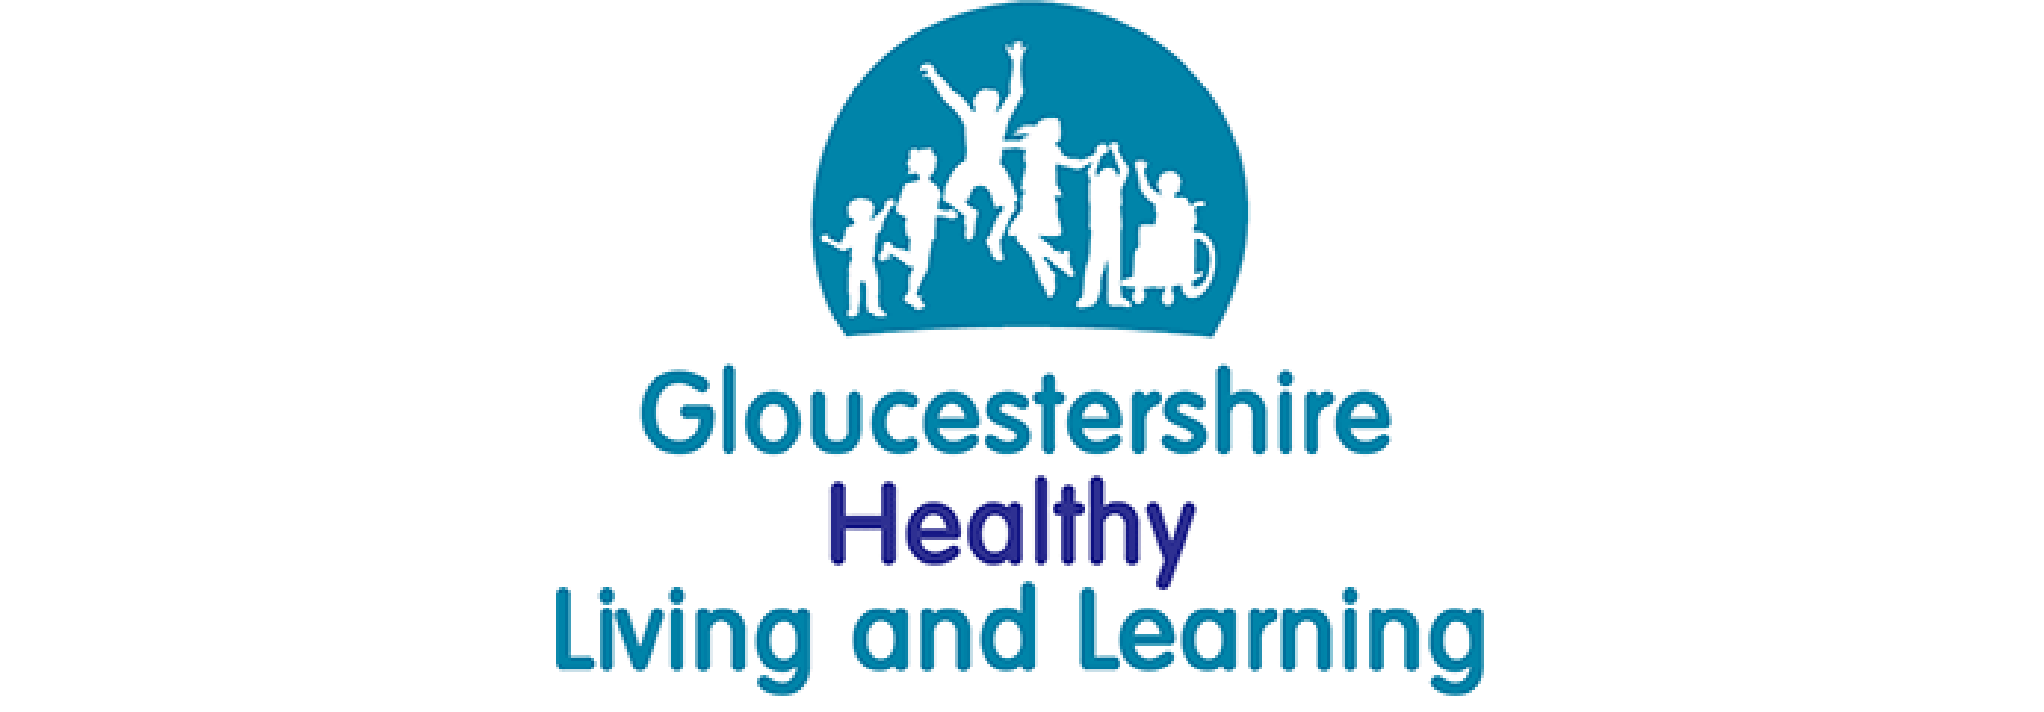 Gloucestshire Healthy Living and Learning.png